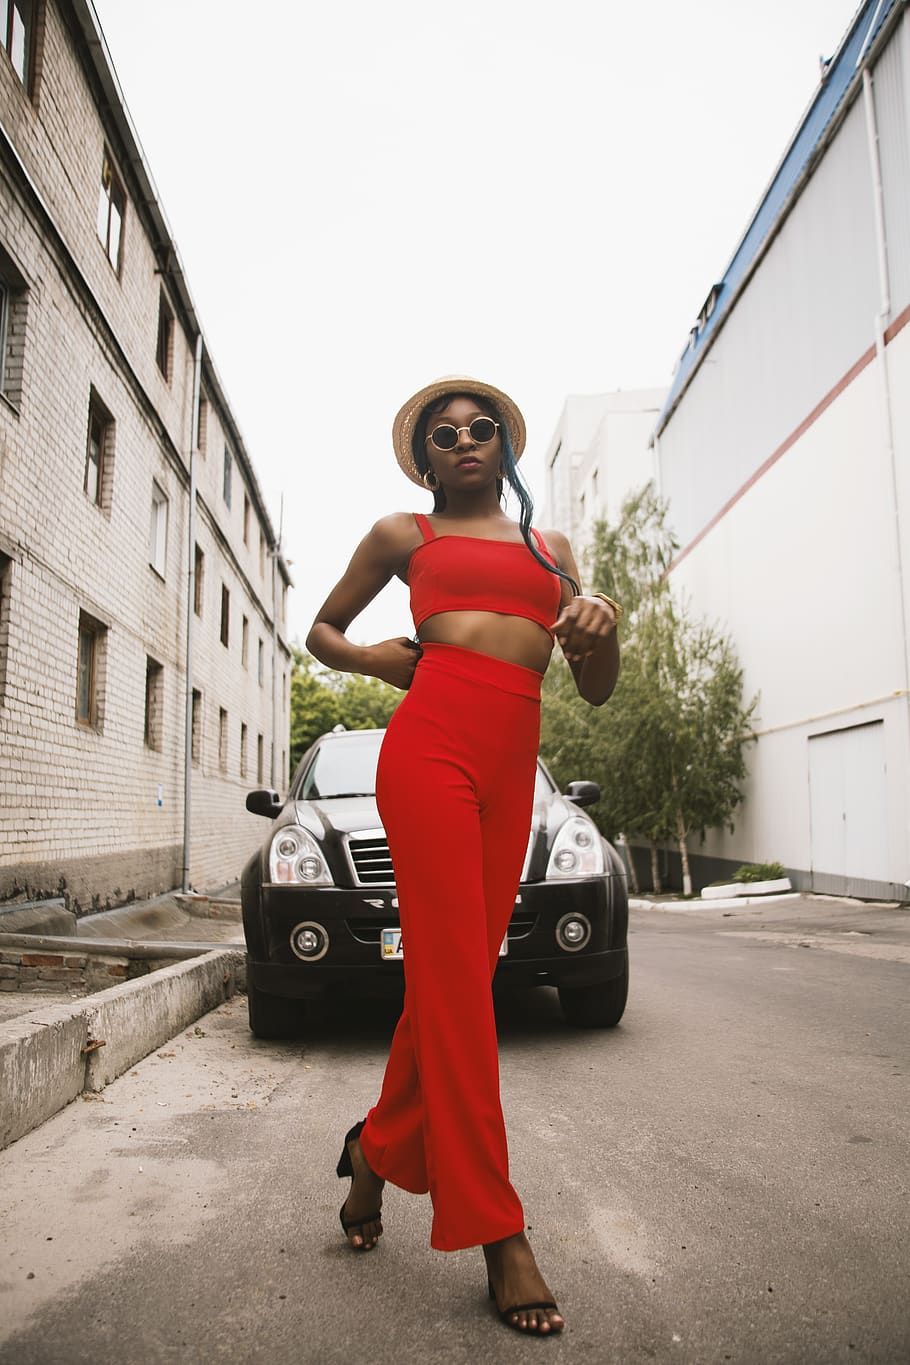 Women's Black Tank Top and Red Track Pants Walking on Street